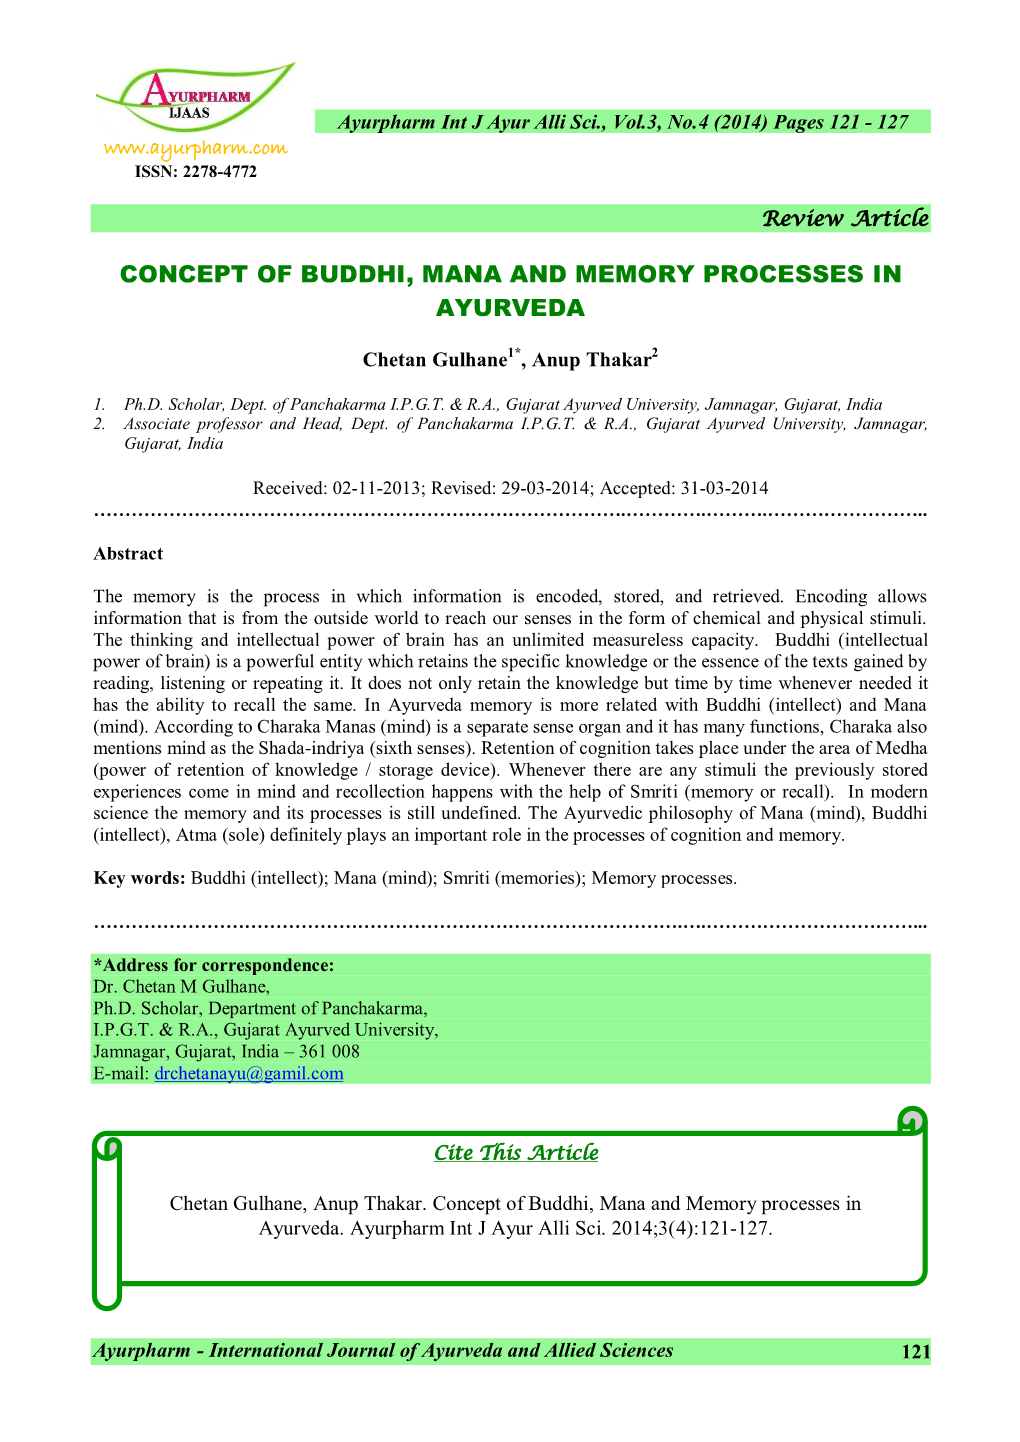 Concept of Buddhi, Mana and Memory Processes in Ayurveda